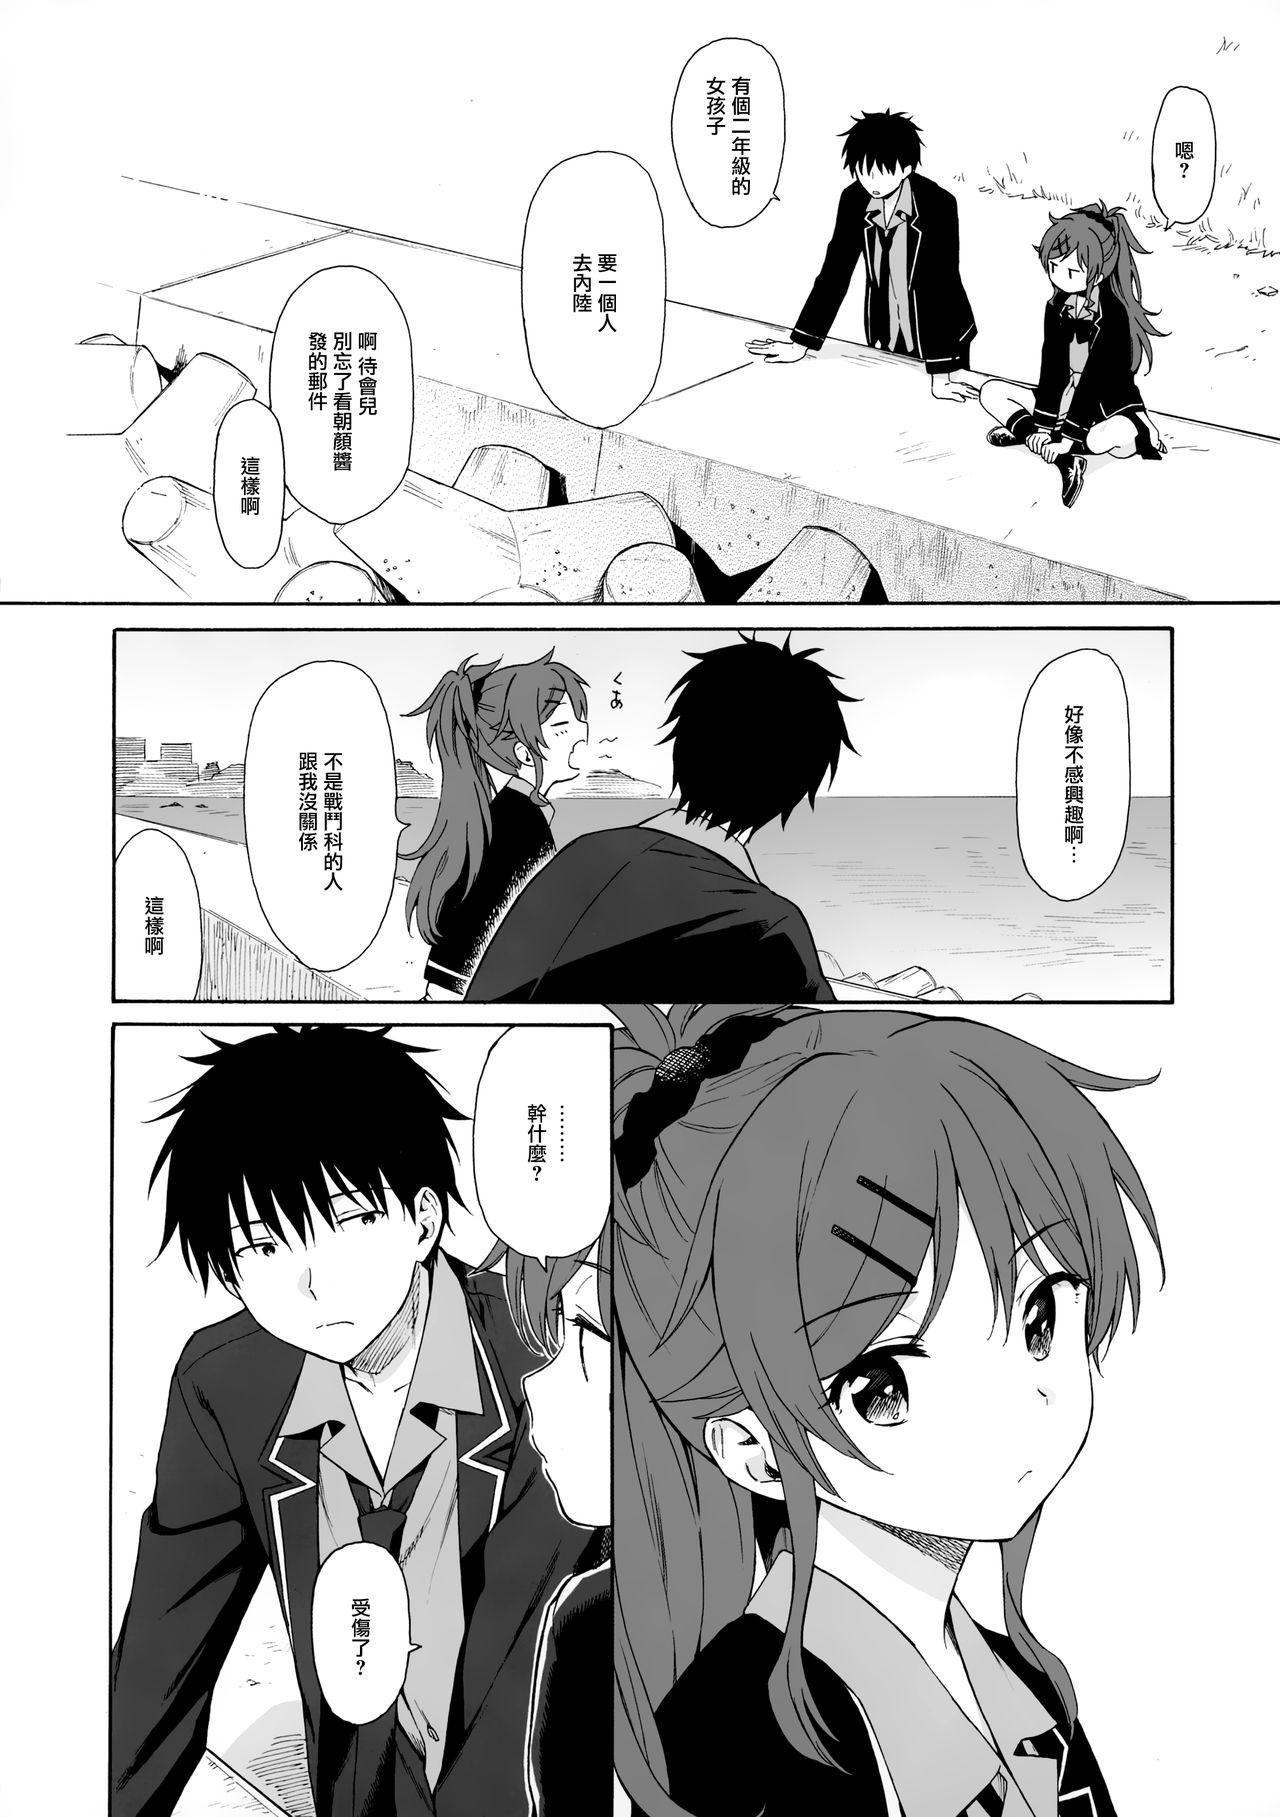 Watersports Utopia - Qualidea code Soloboy - Page 8